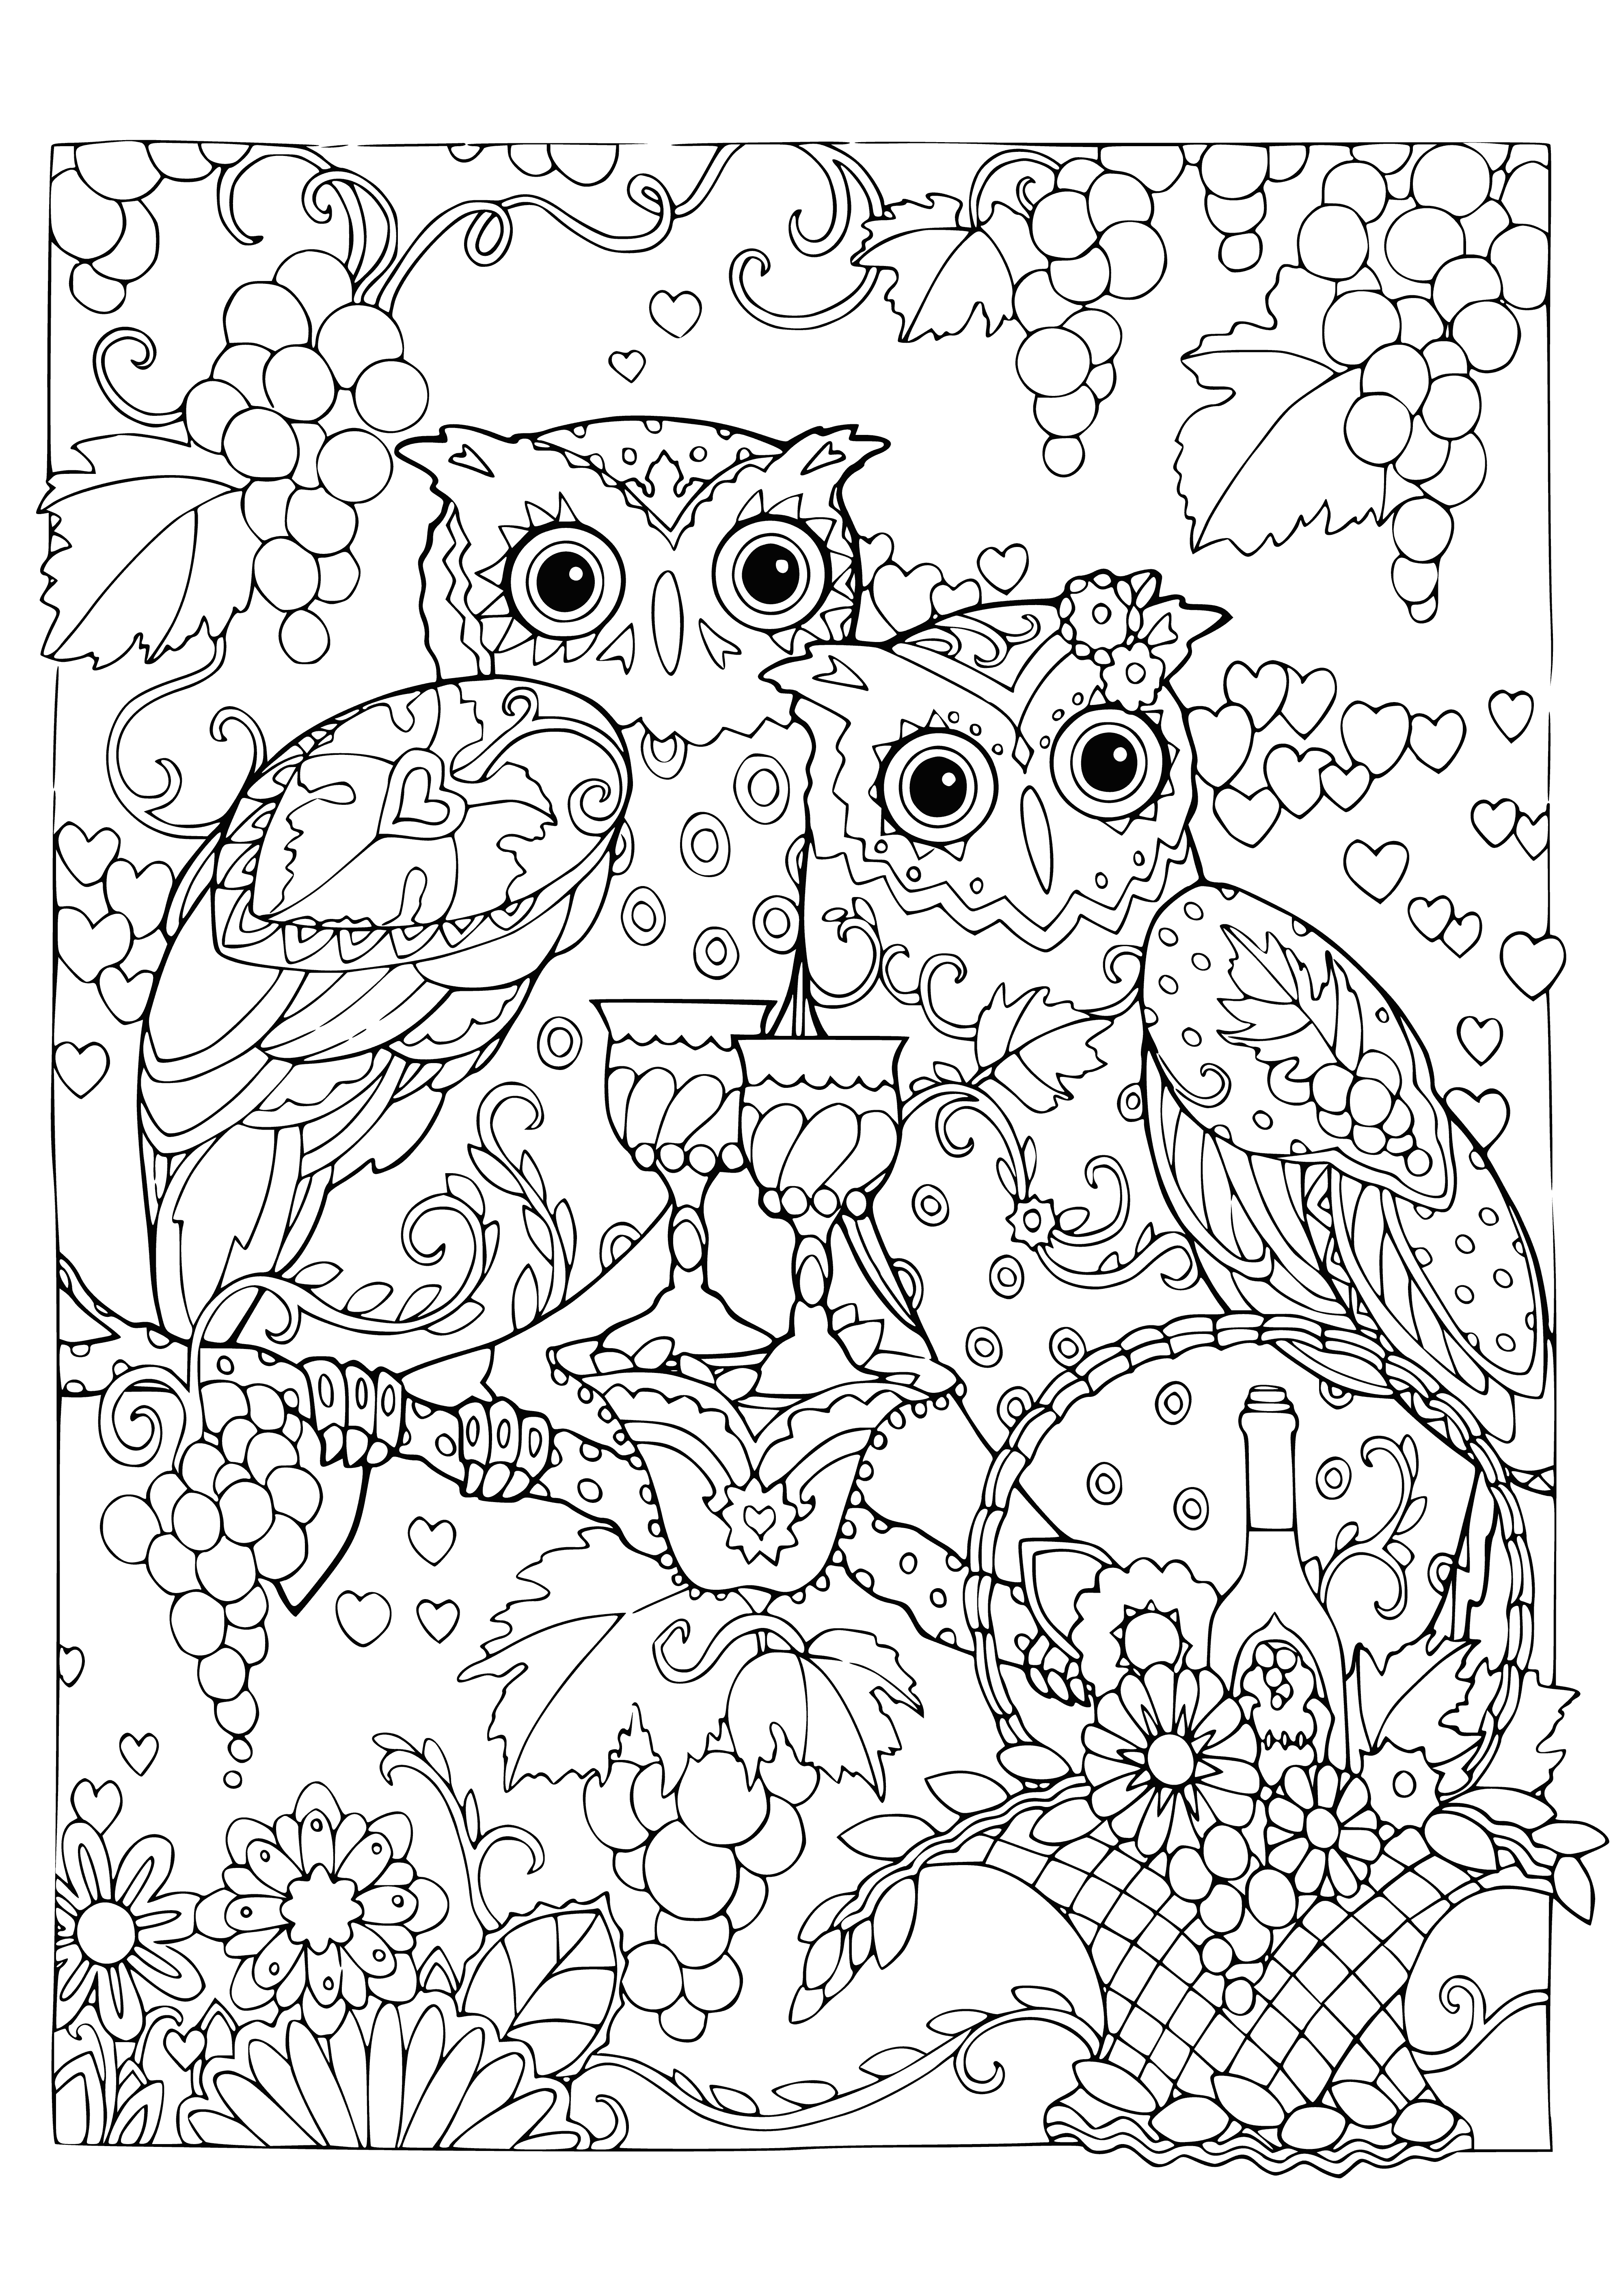 coloring page: Owls gathered around a feast, eating & enjoying each other's company.